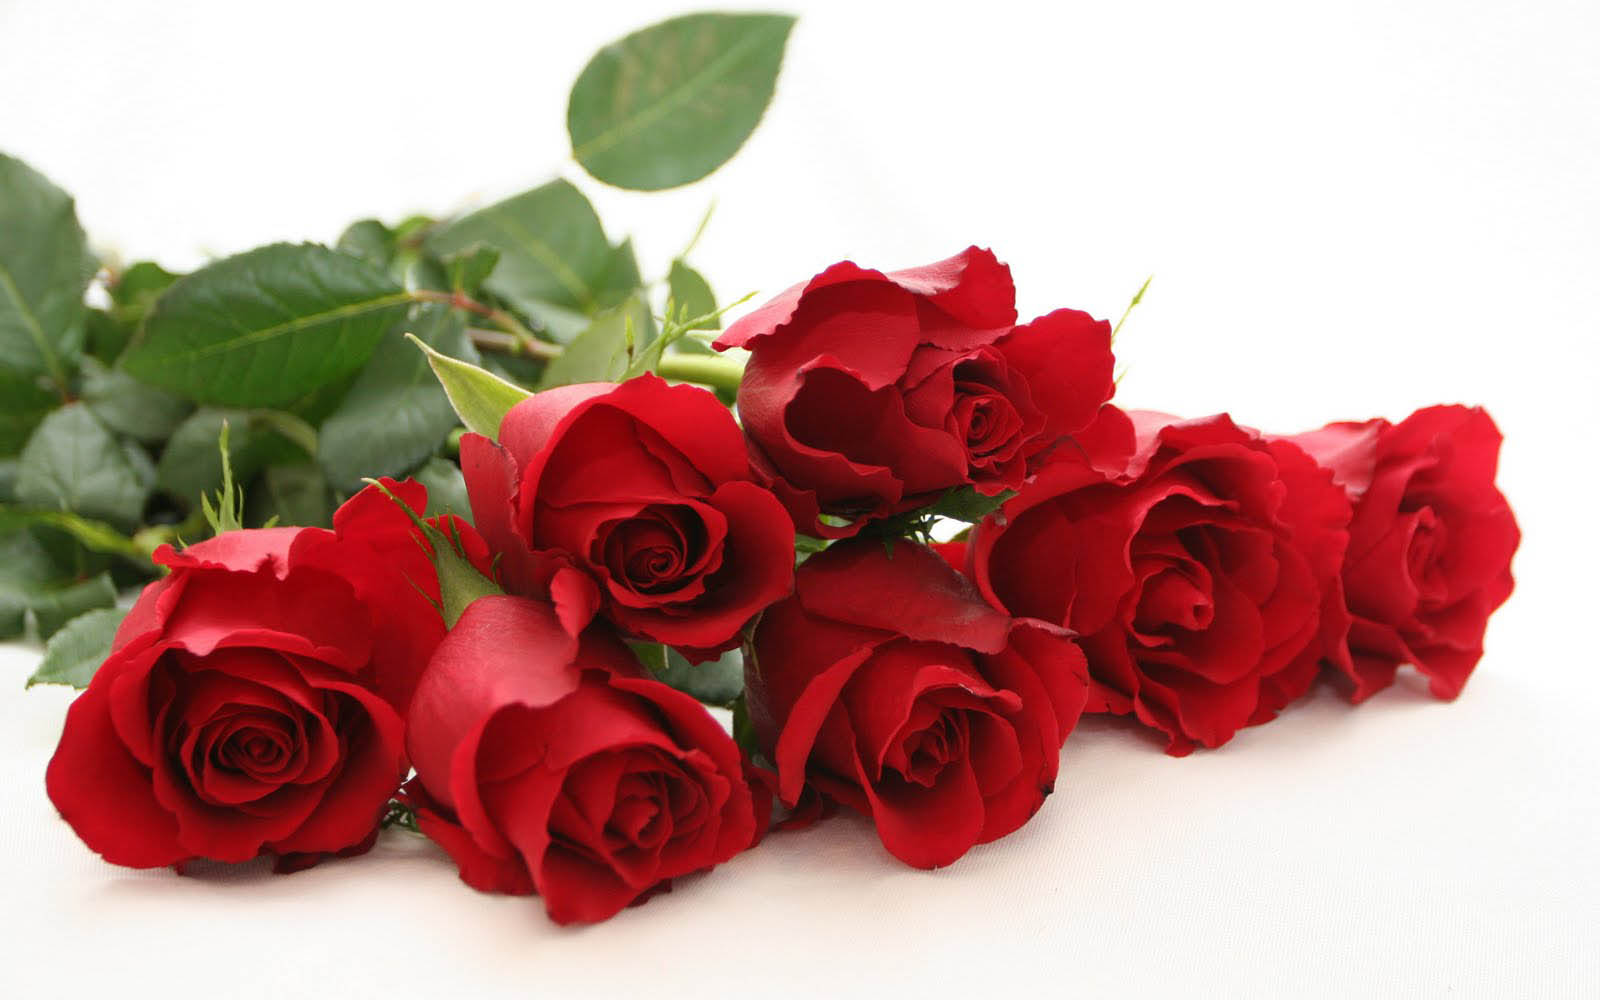 Tag Red Rose Wallpapers Images Photos Pictures and Backgrounds for